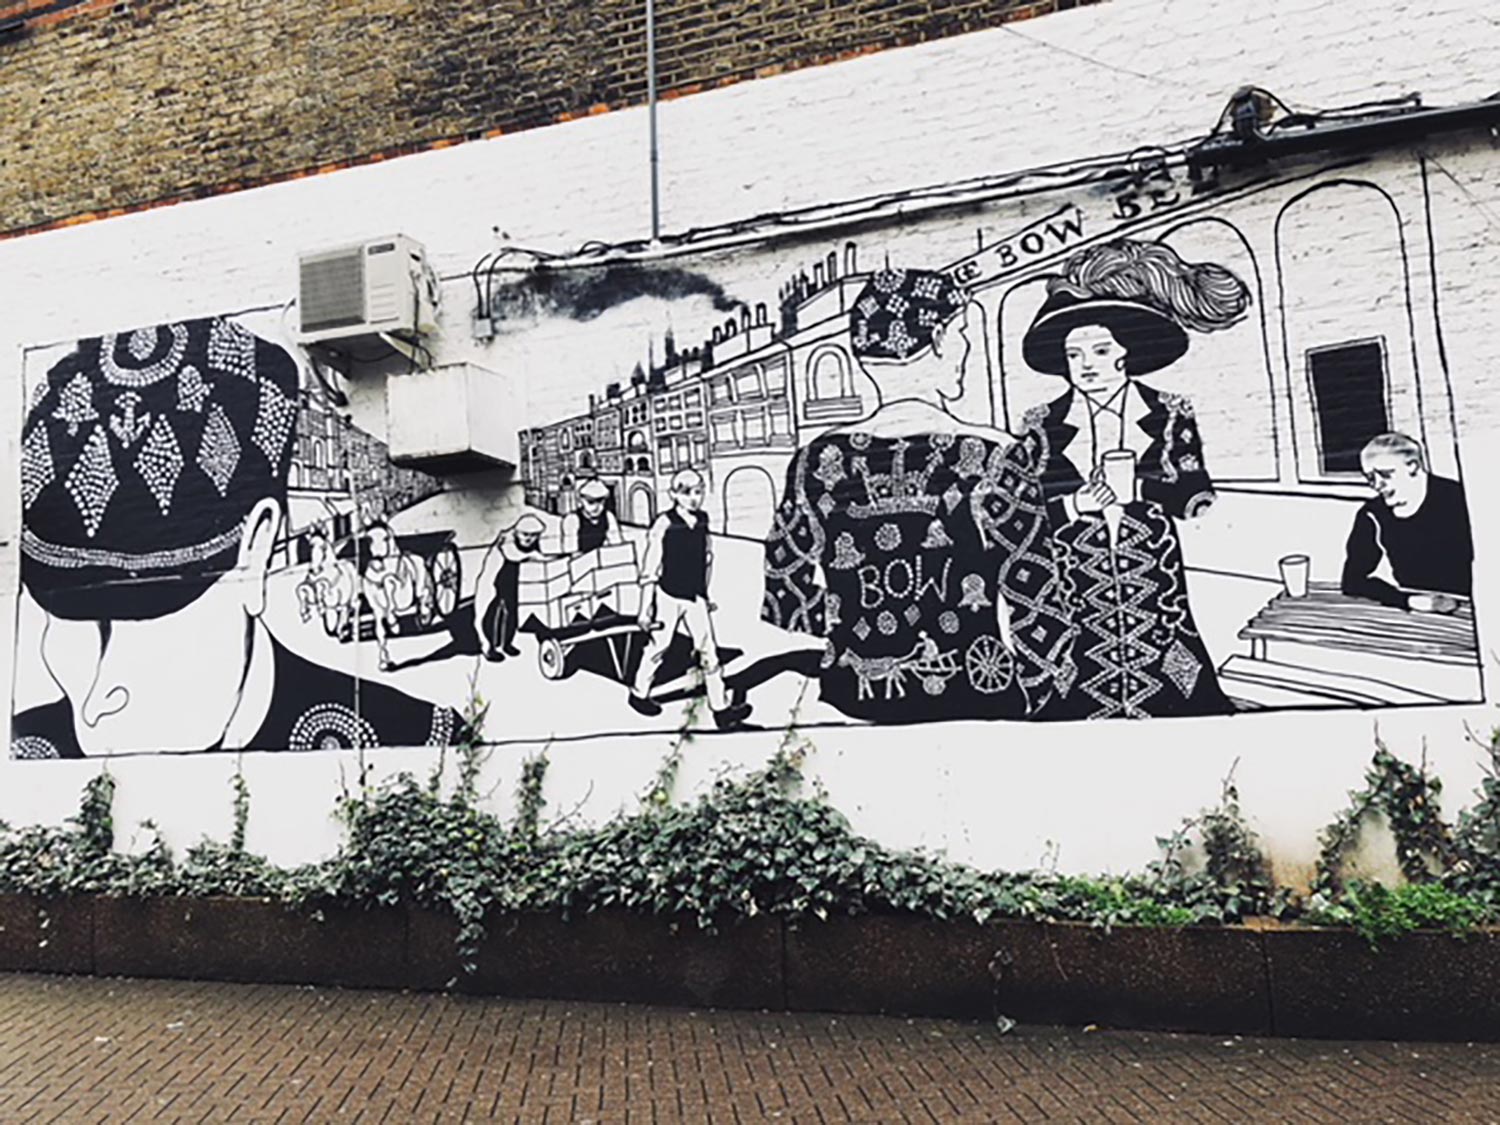 Black and white mural of pearly kings and queens on a wall near Bow Bells, East London